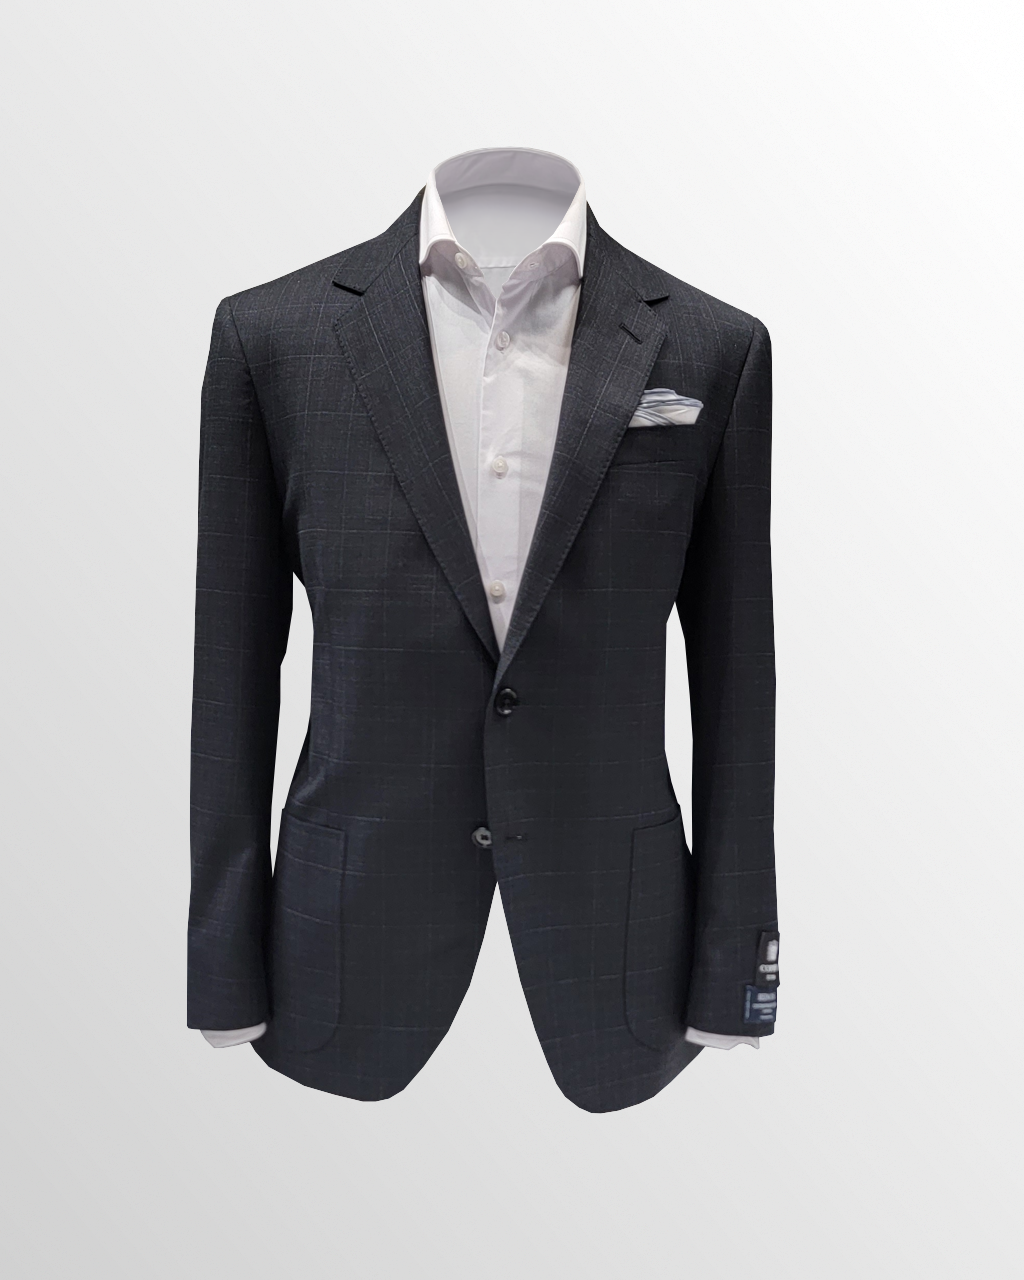 Coppley Gio Sport Jacket in Charcoal